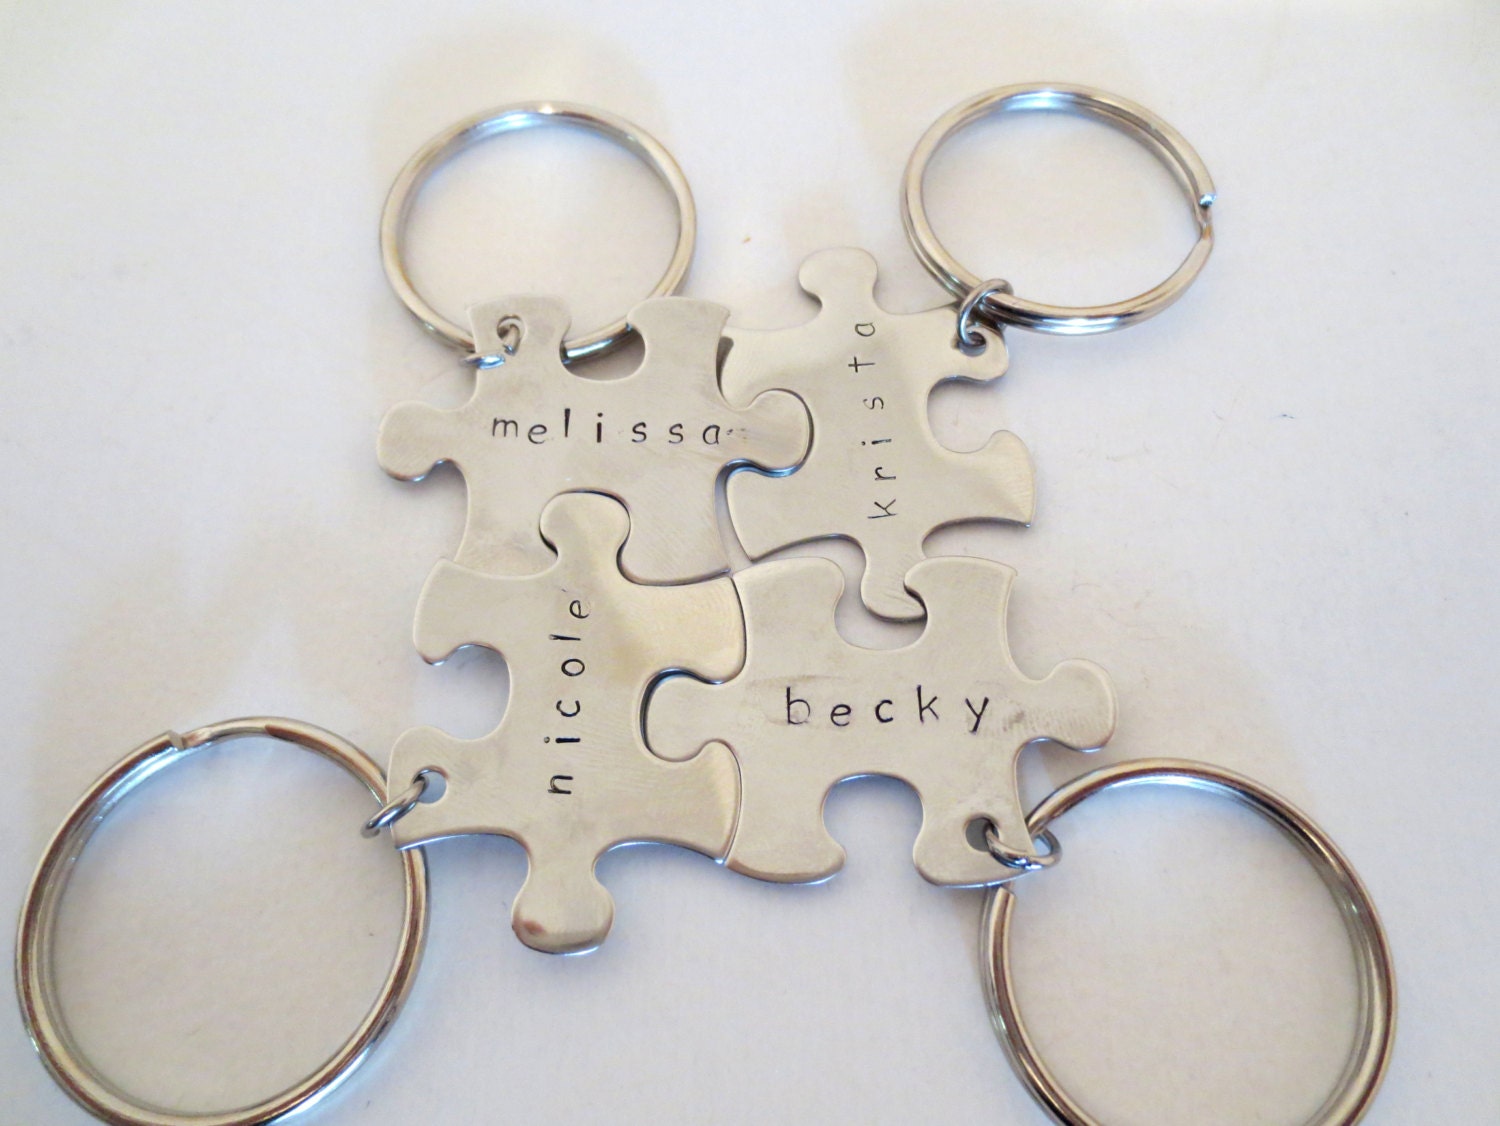 Bridesmaid Gift Puzzle Piece Set Keychain - Multi Number of Pieces- Hand Stamped Personalized -  Wedding Date- Bridal Party - Gift Under 25 - DreamWillowStudio